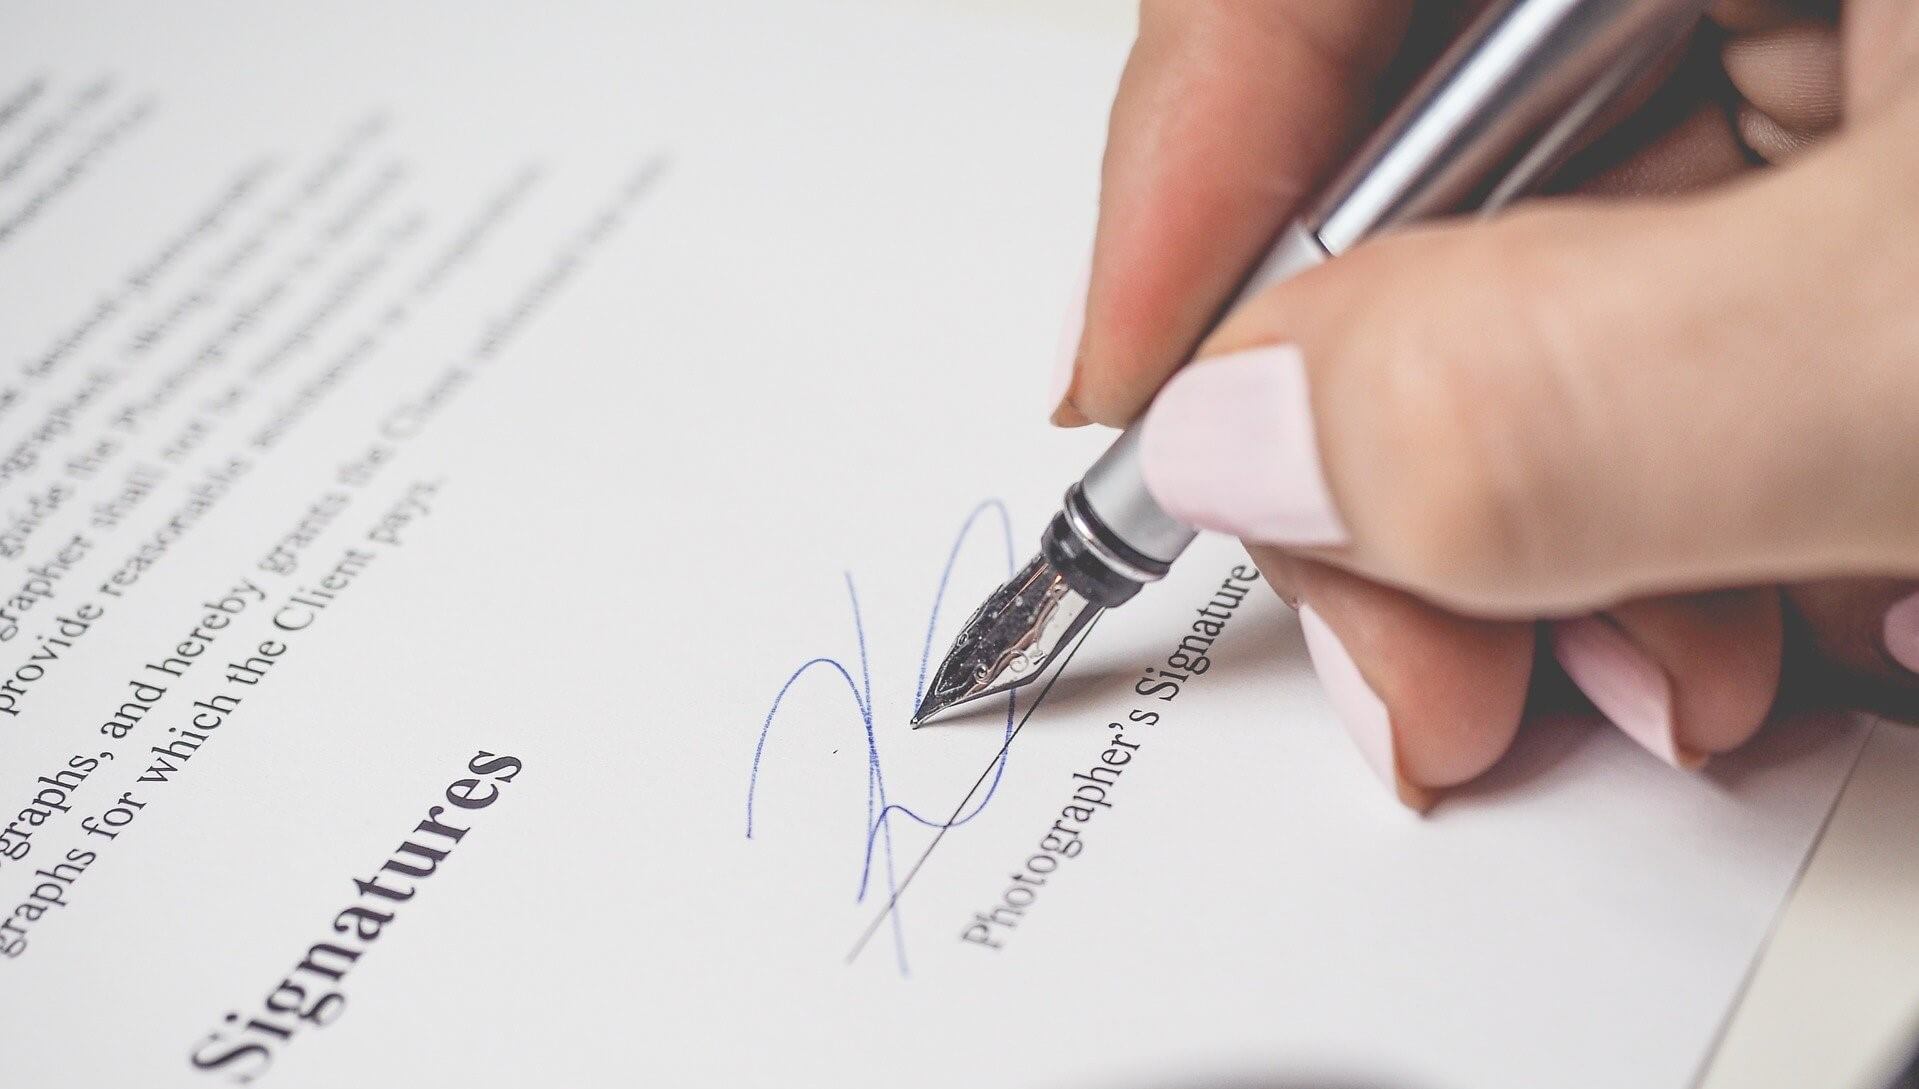 Should you sign your client’s contract or use yours?